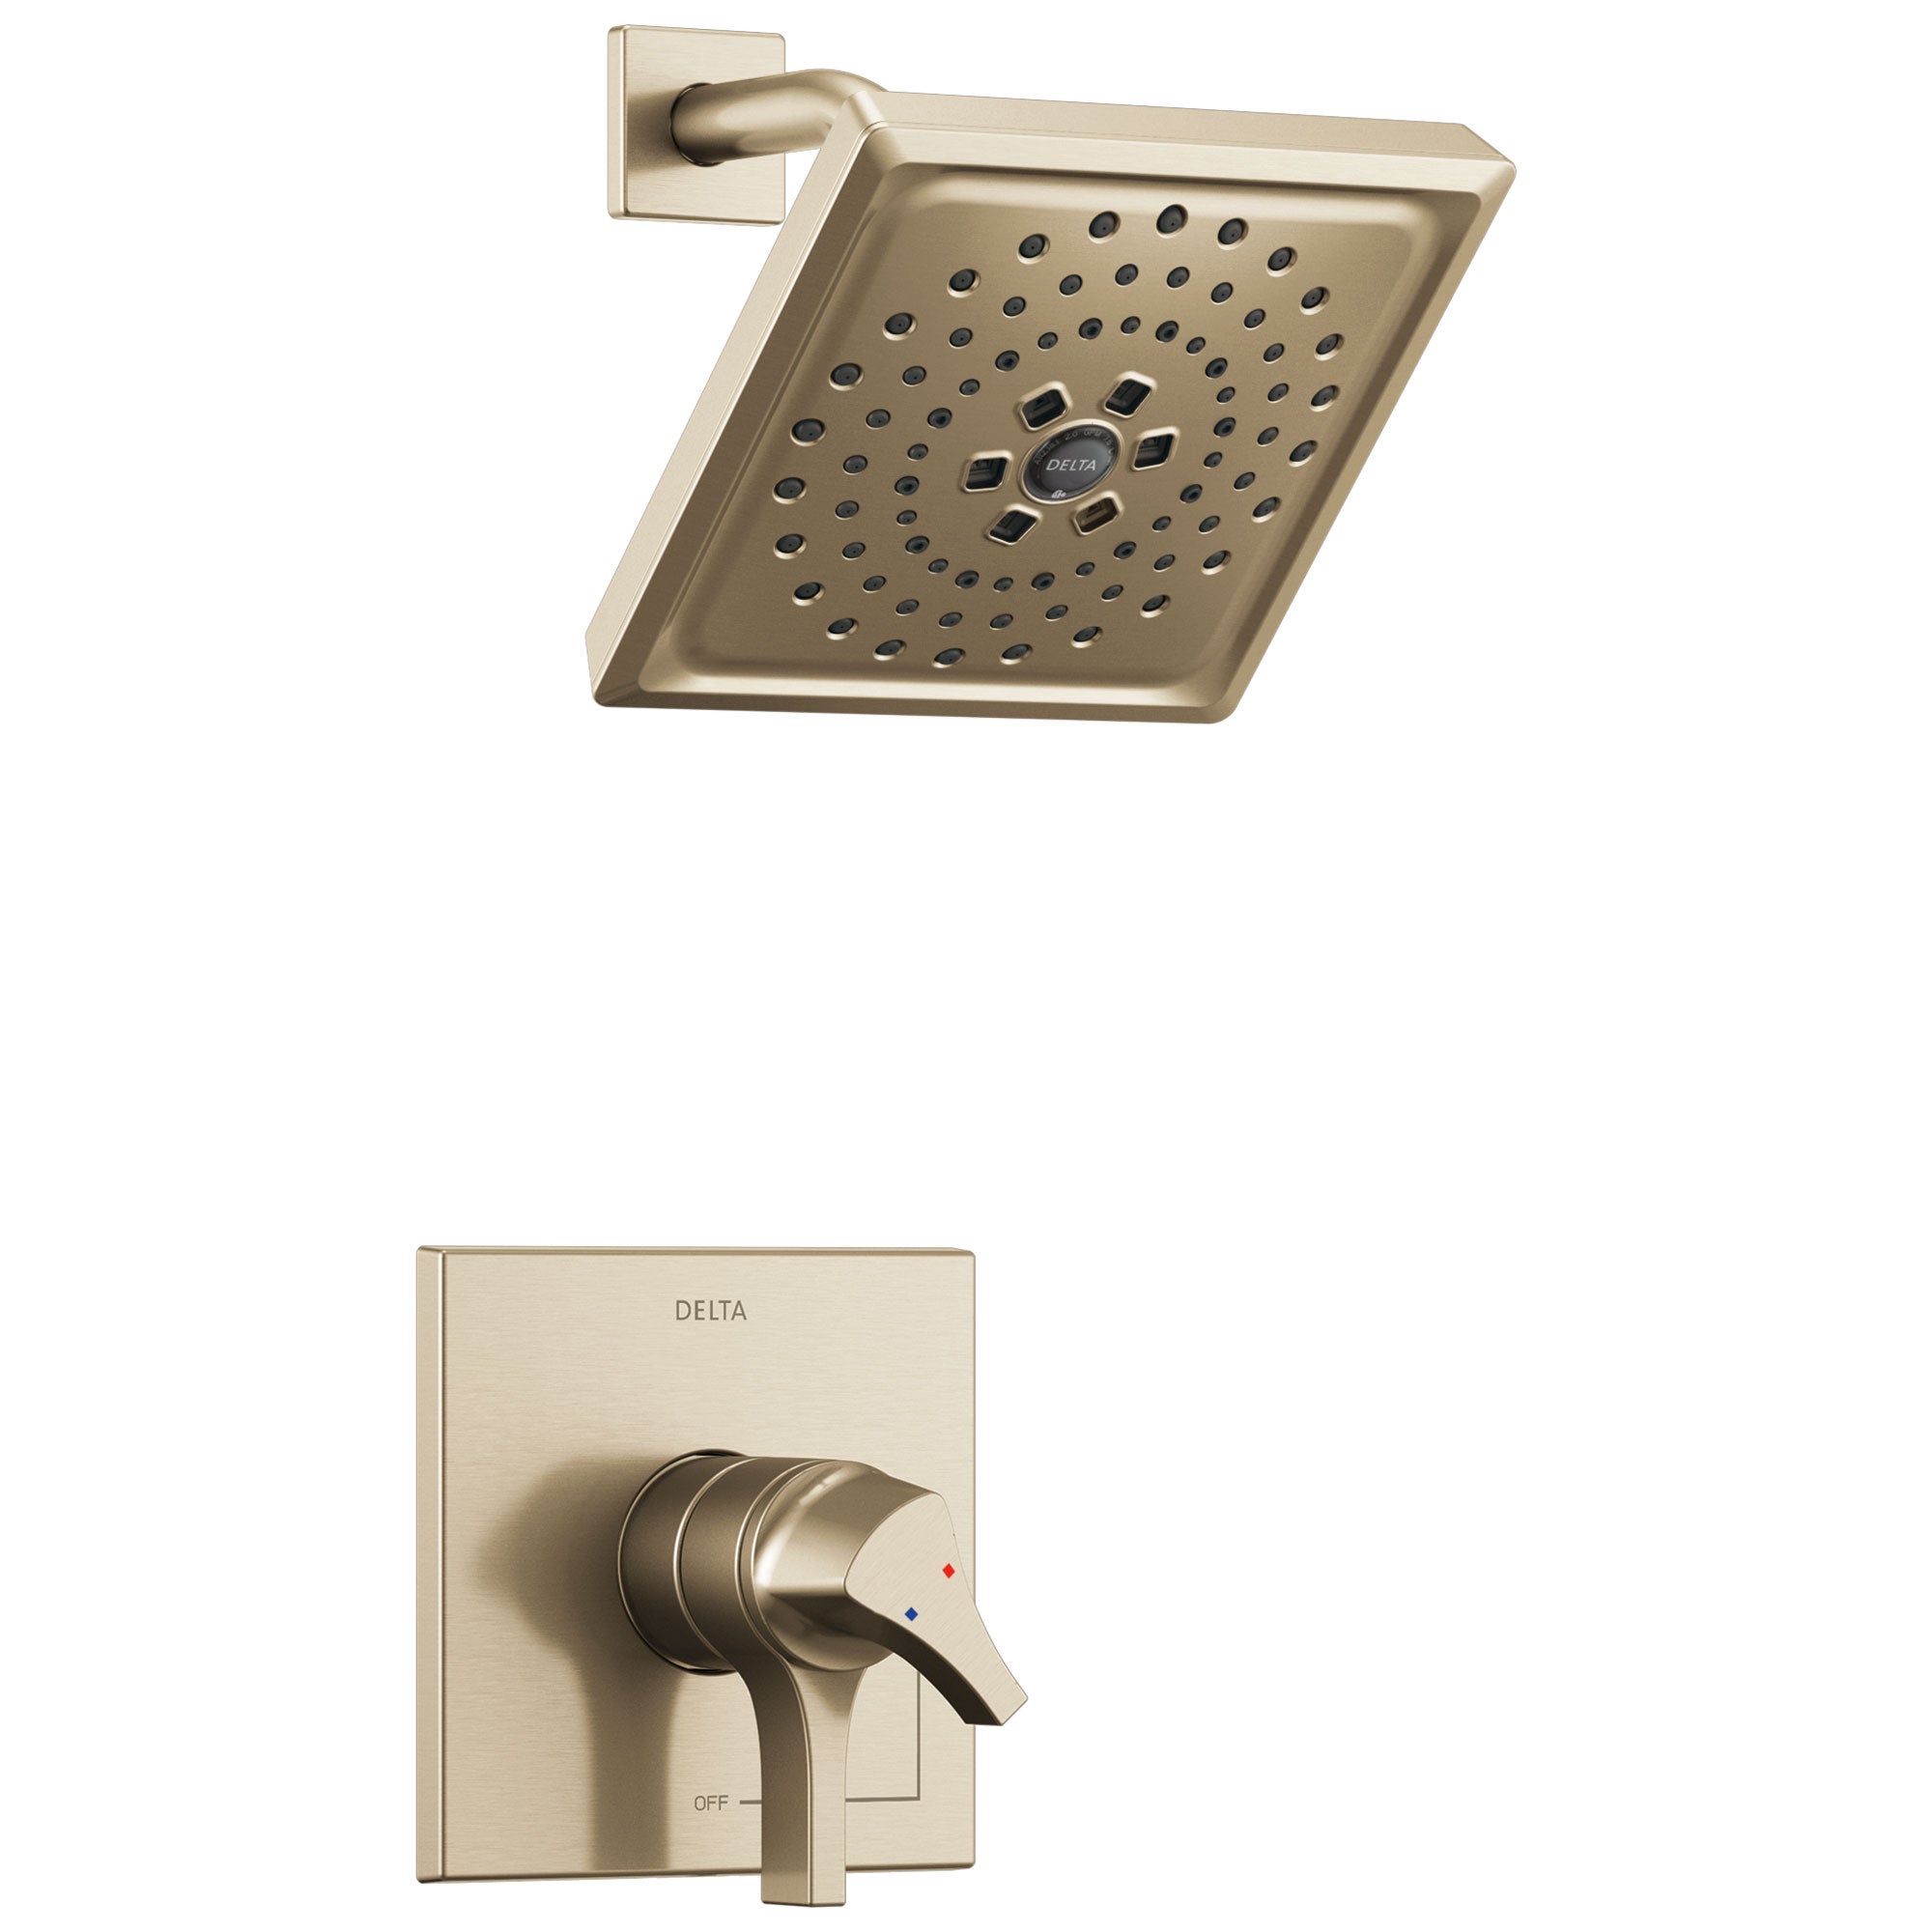 Delta Zura Champagne Bronze Finish Monitor 17 Series H2Okinetic Shower Only Faucet with Handles, Cartridge, and Valve without Stops D3371V